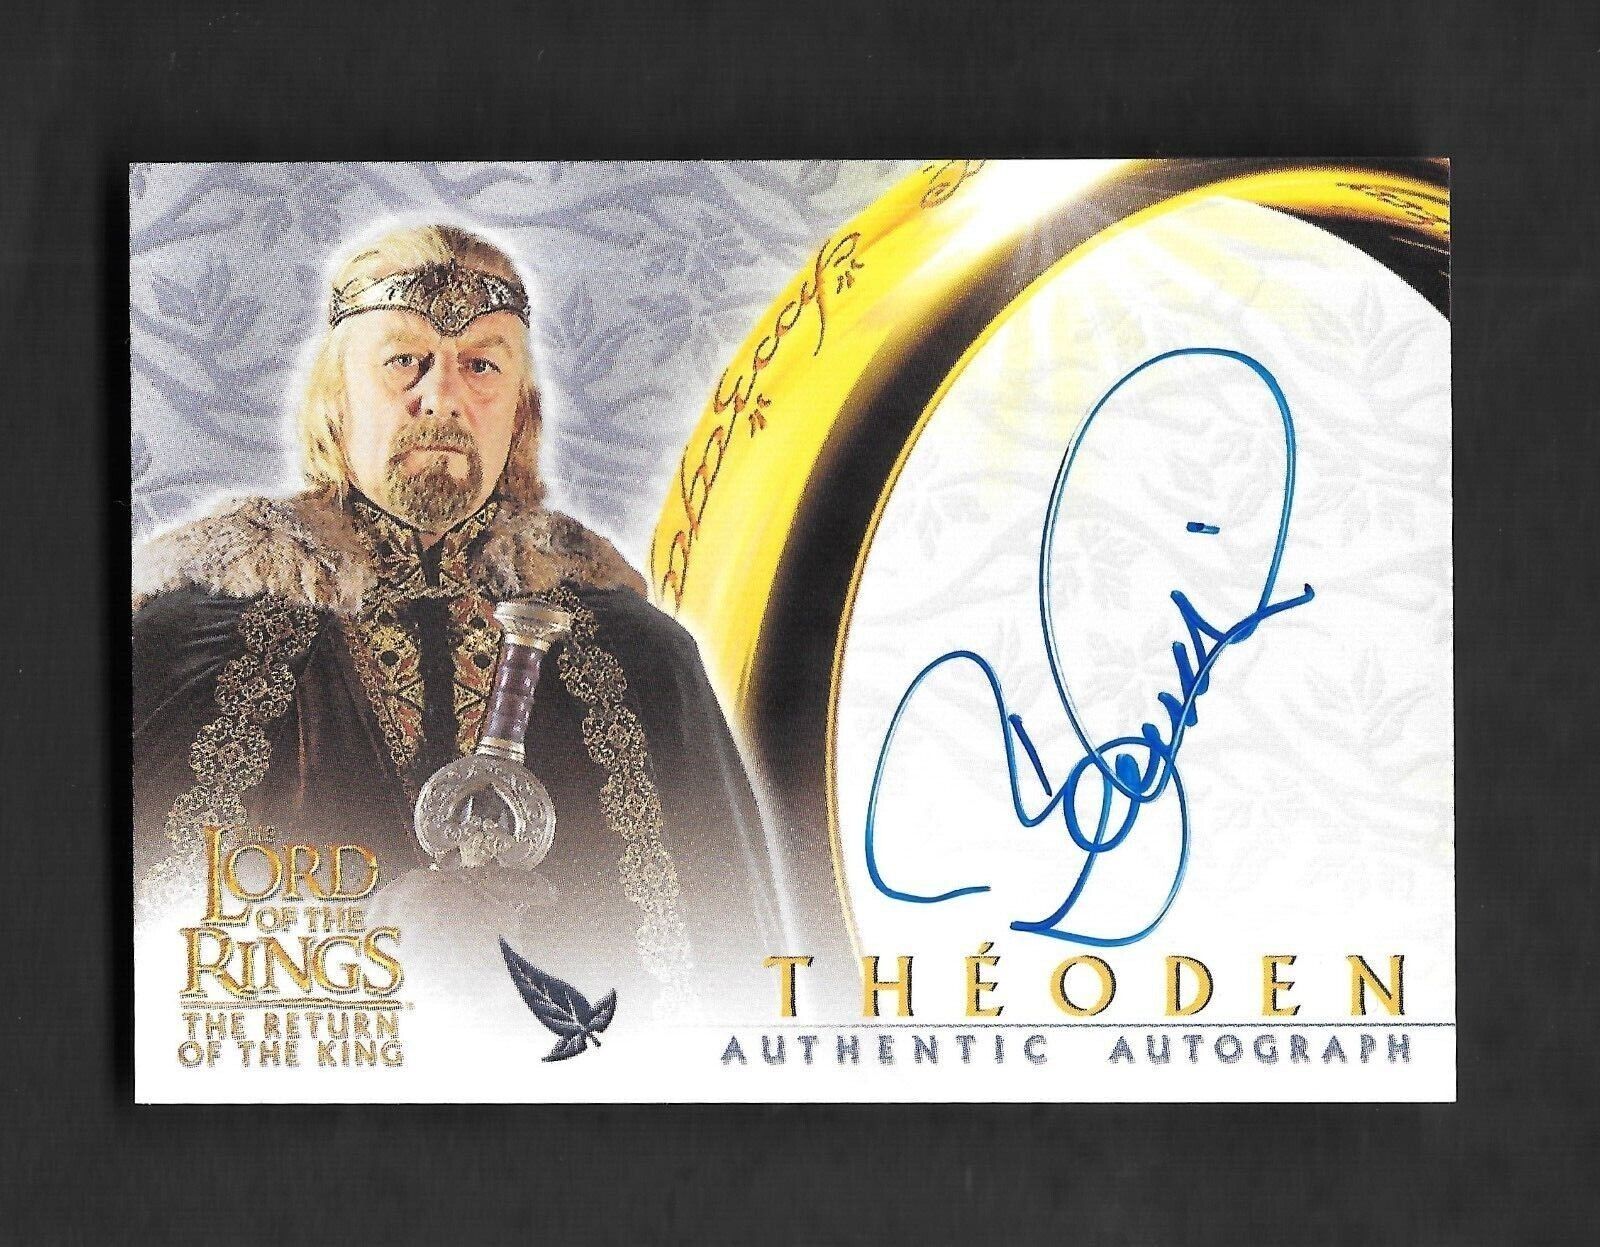 2003 Topps Lord of the Rings Return of the King Autograph Bernard Hill Theoden